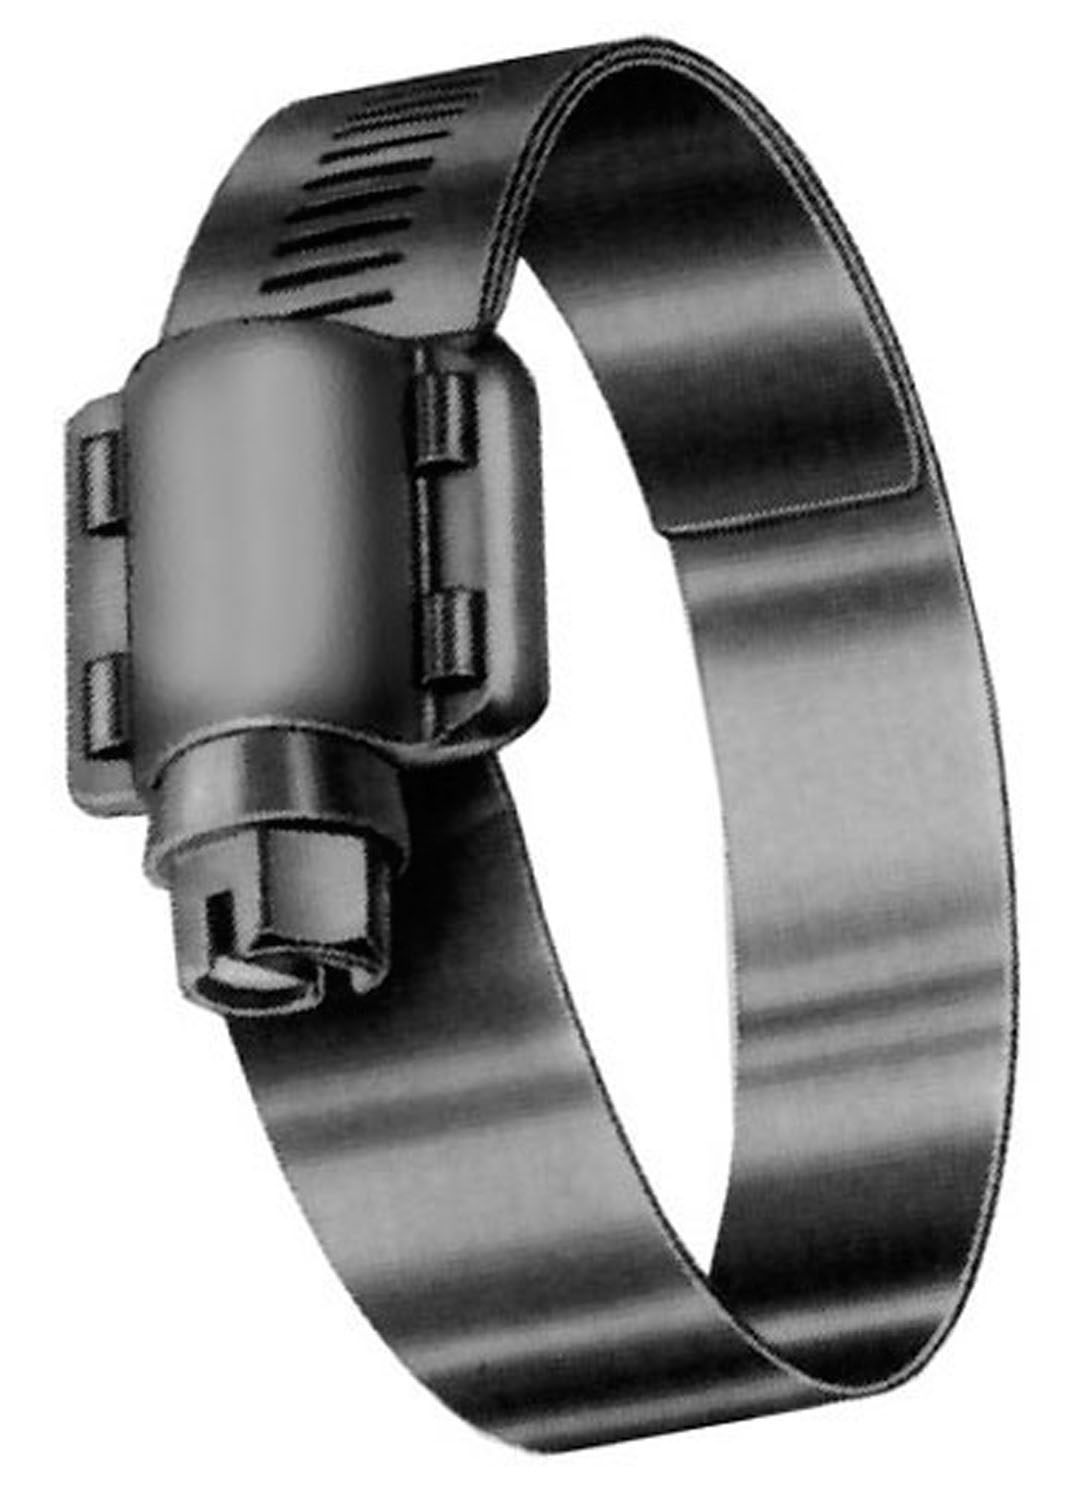 1/2" Stainless Steel Hose Clamps Pack of 5-8mm thick 